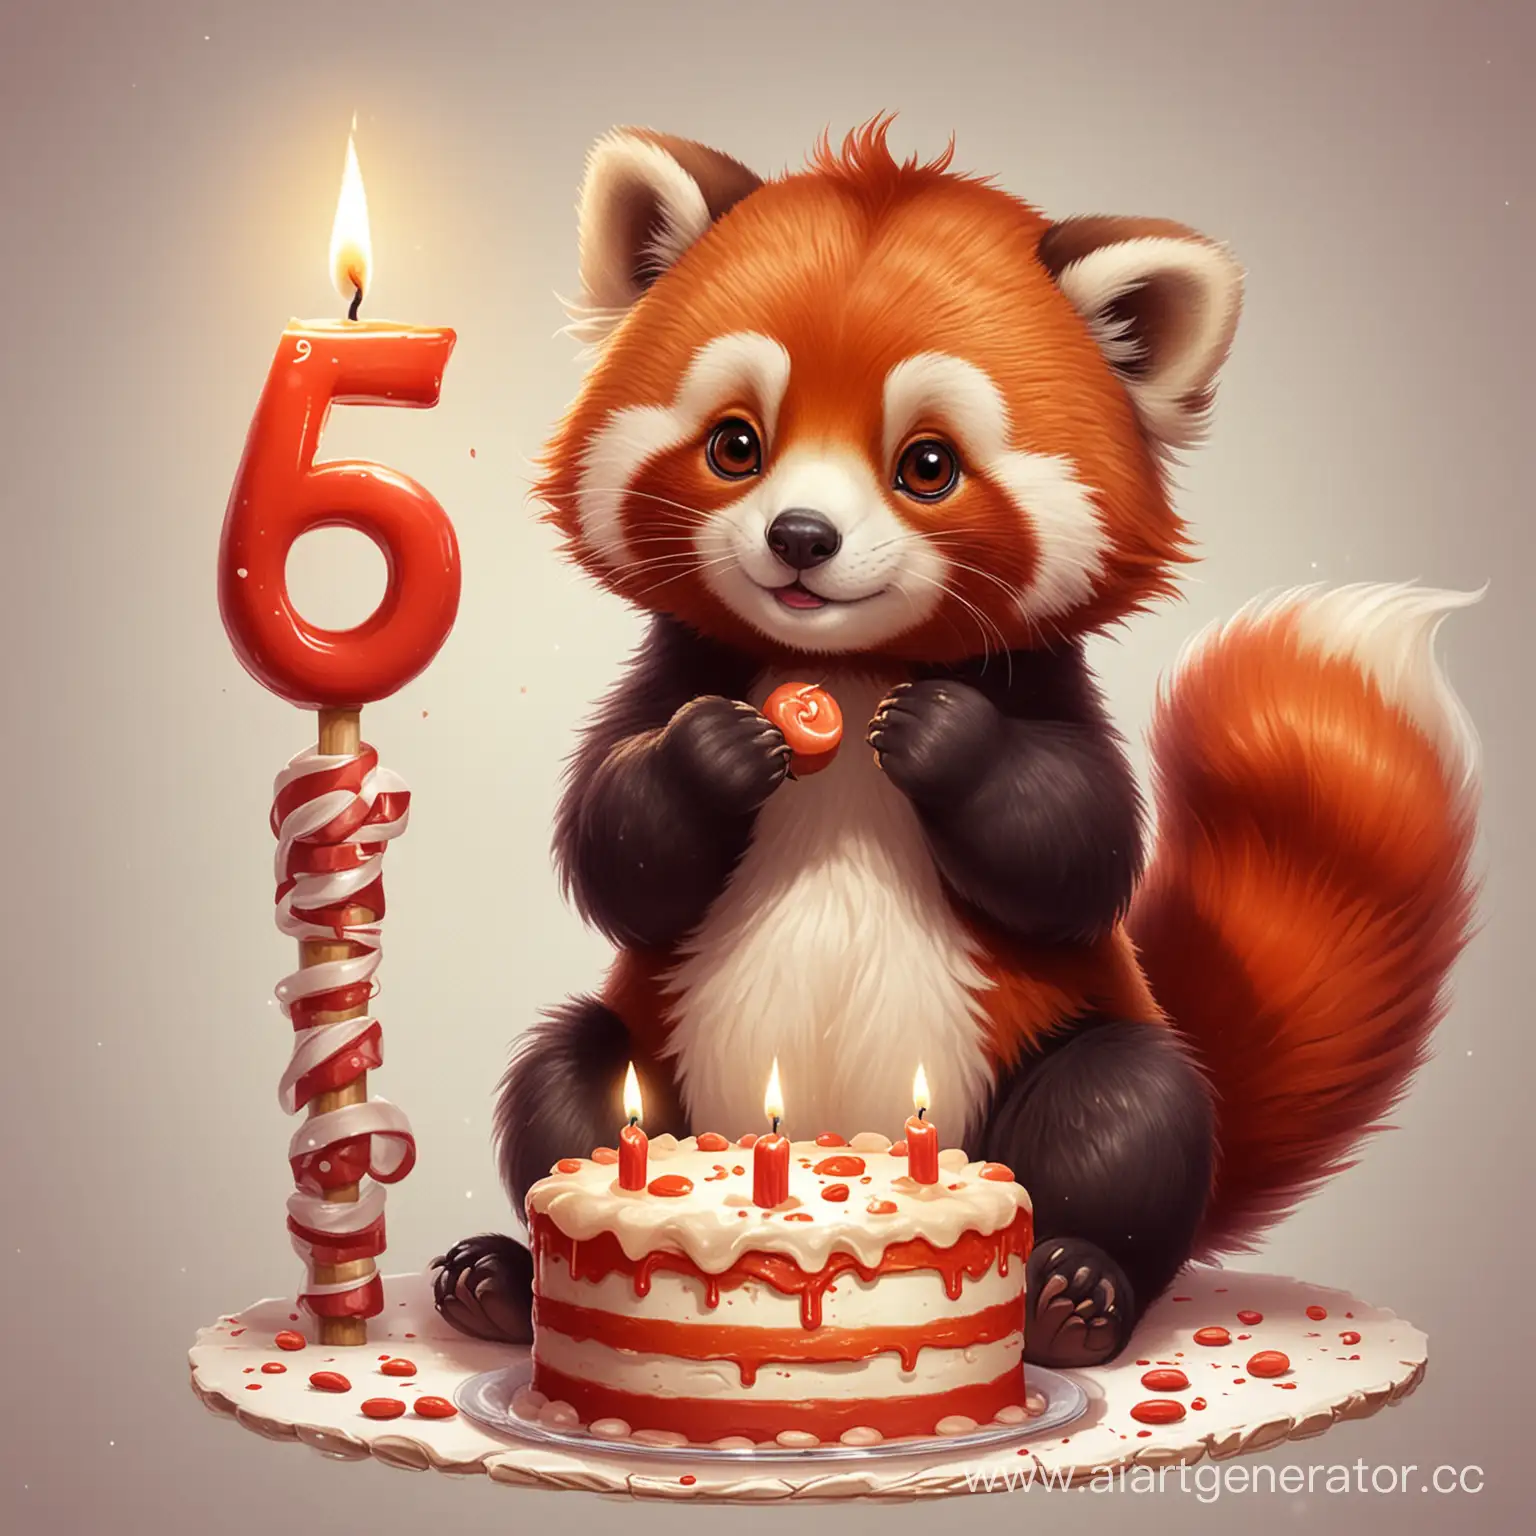 Adorable-Red-Panda-Celebrating-Fifth-Birthday-with-Cake-and-Candle